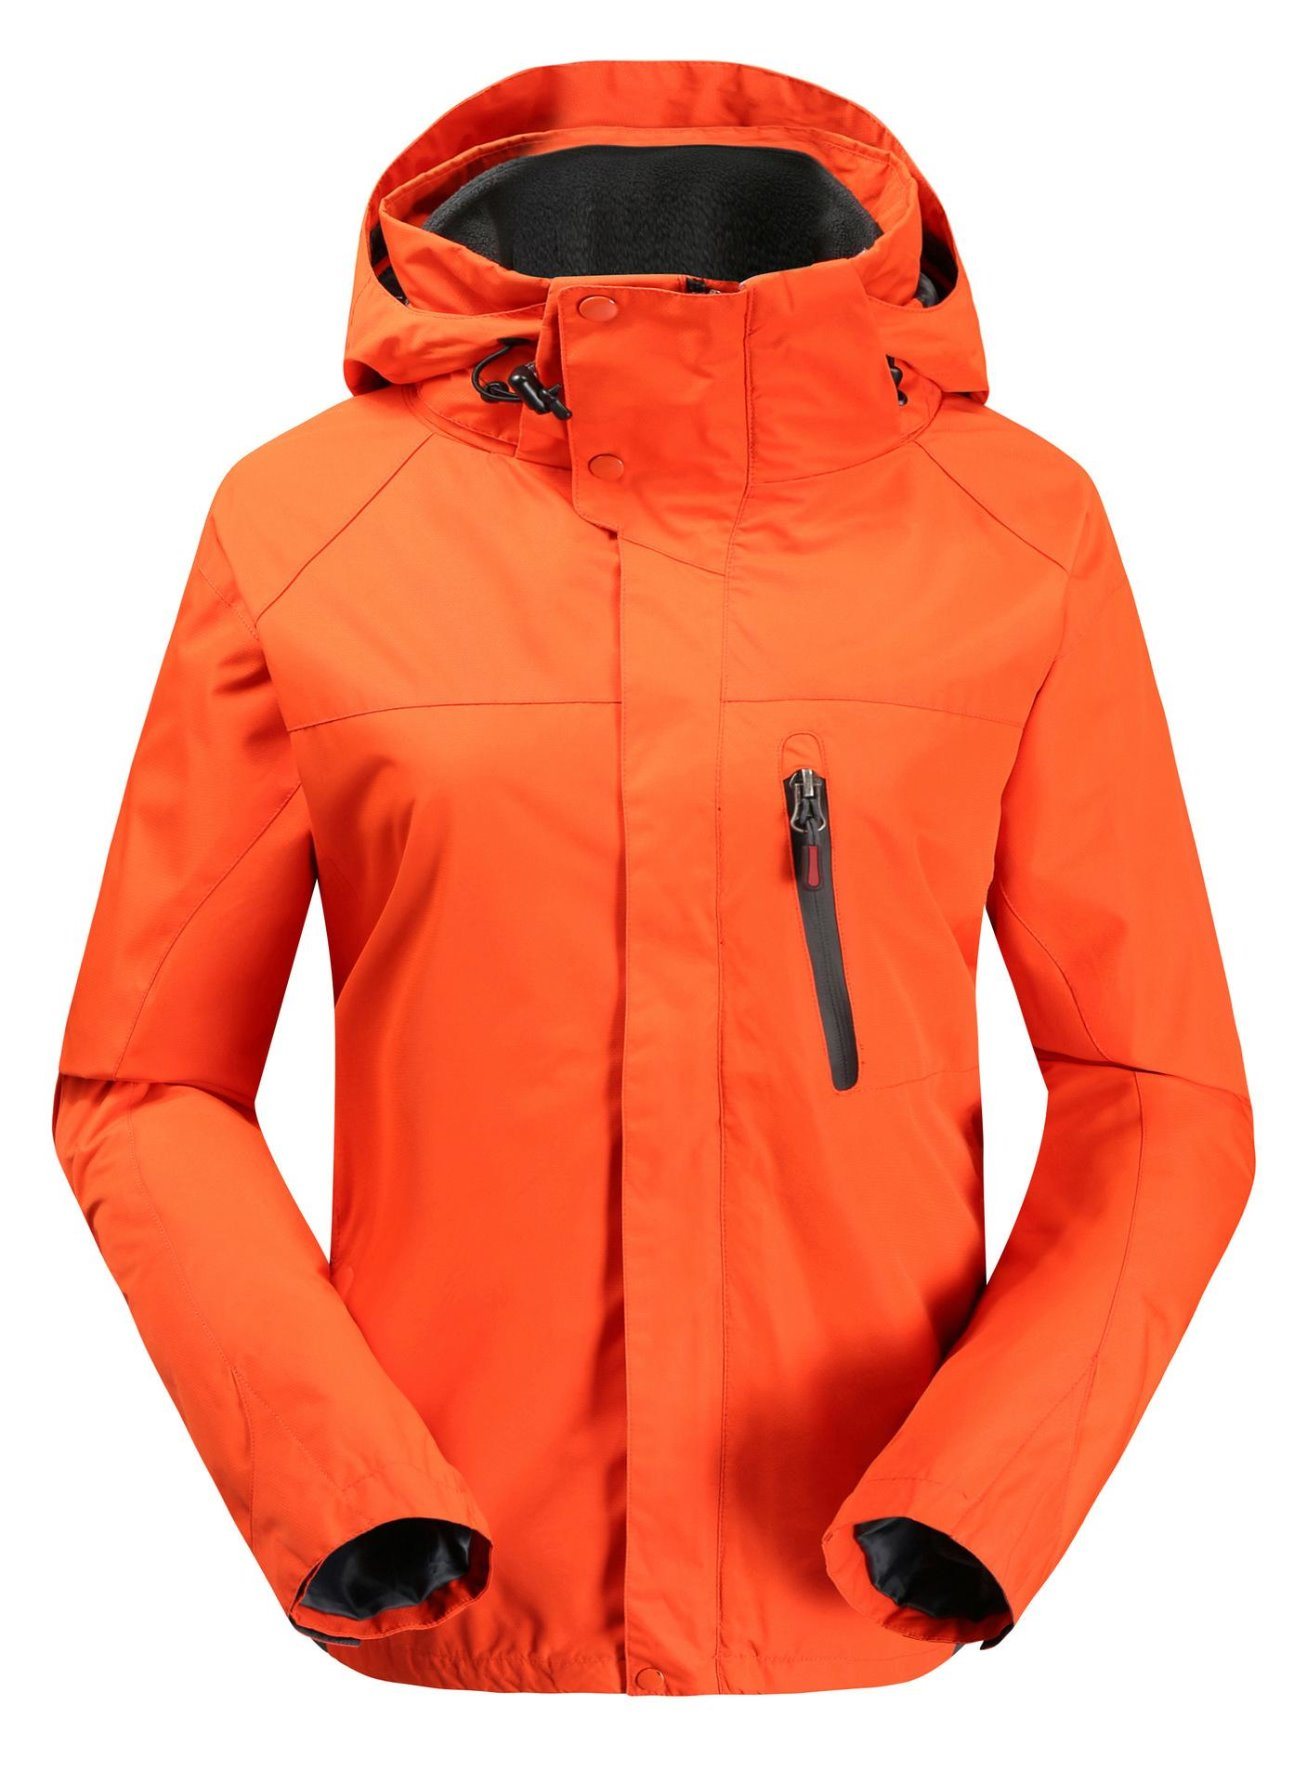 Water Repellent Jacket Made in China